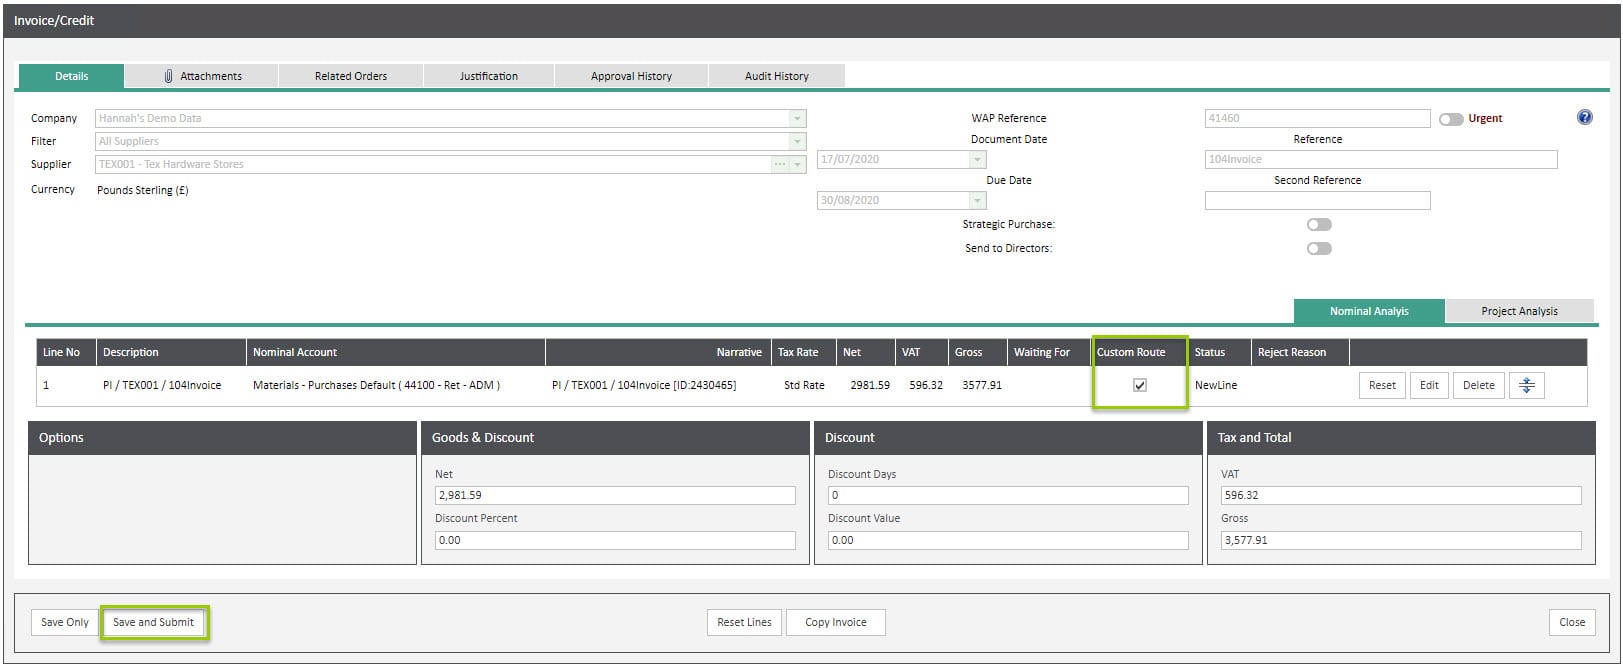 Sicon WAP Invoice Help and User Guide - Invoice HUG Section 6.4 Image 3